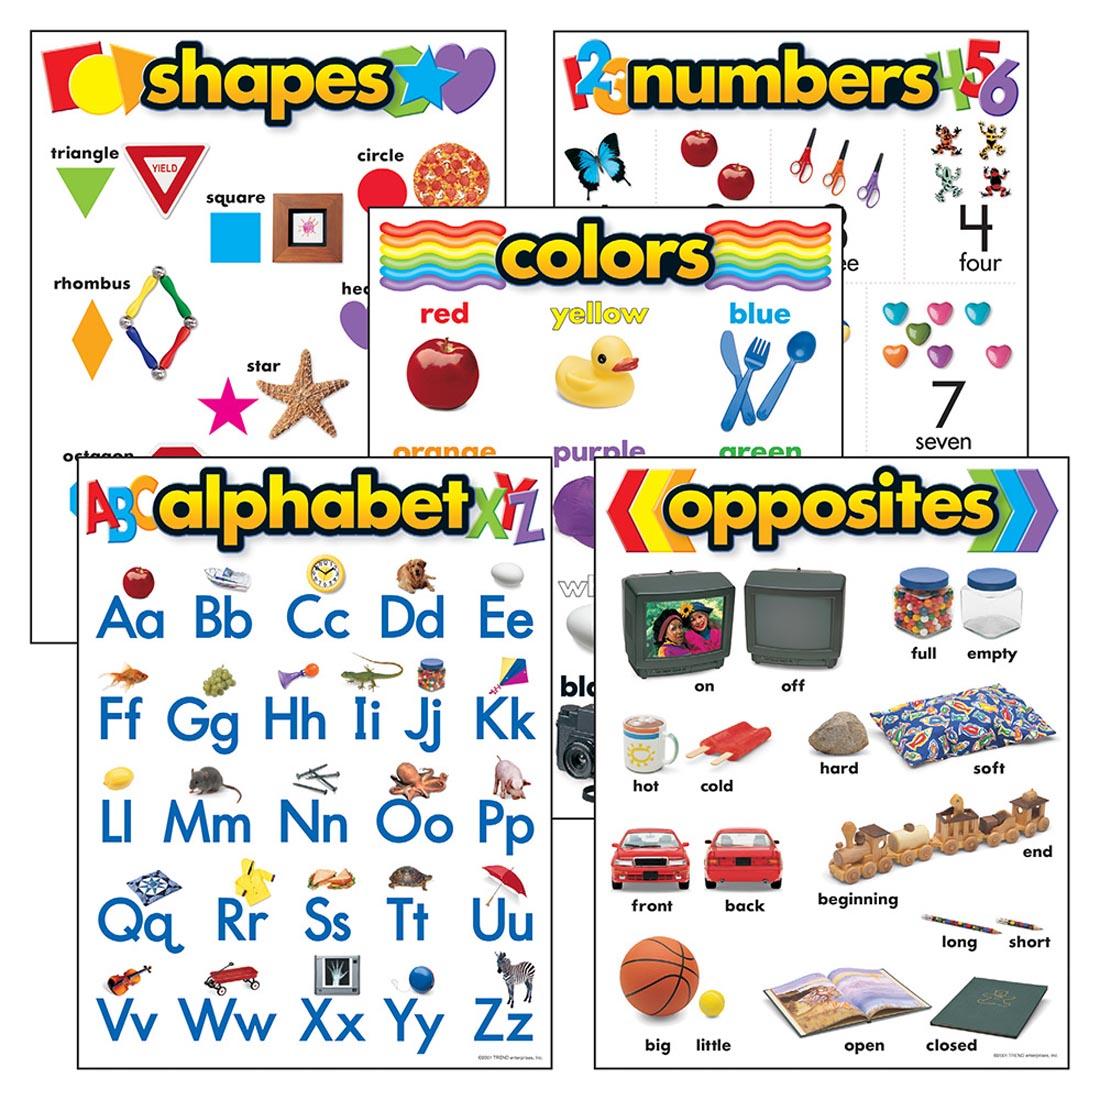 TREND Kindergarten Basic Skills Learning Charts include Shapes, Numbers, Colors, Alphabet and Opposites